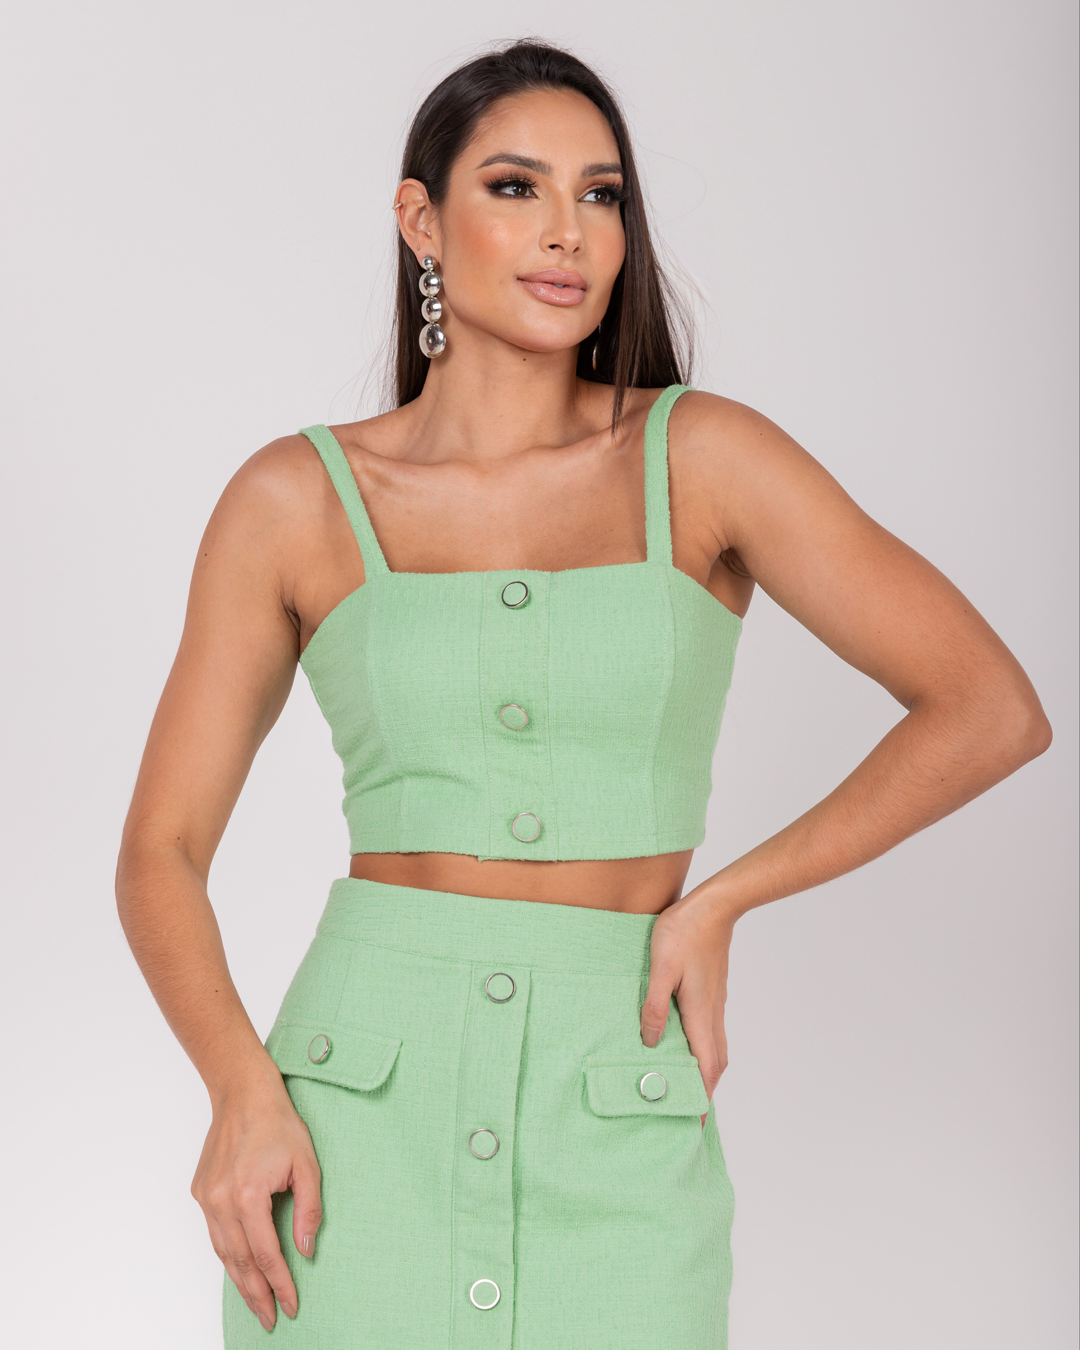 Miss Misses - Cropped Miss Misses Top Tweed Green Button - 54059023